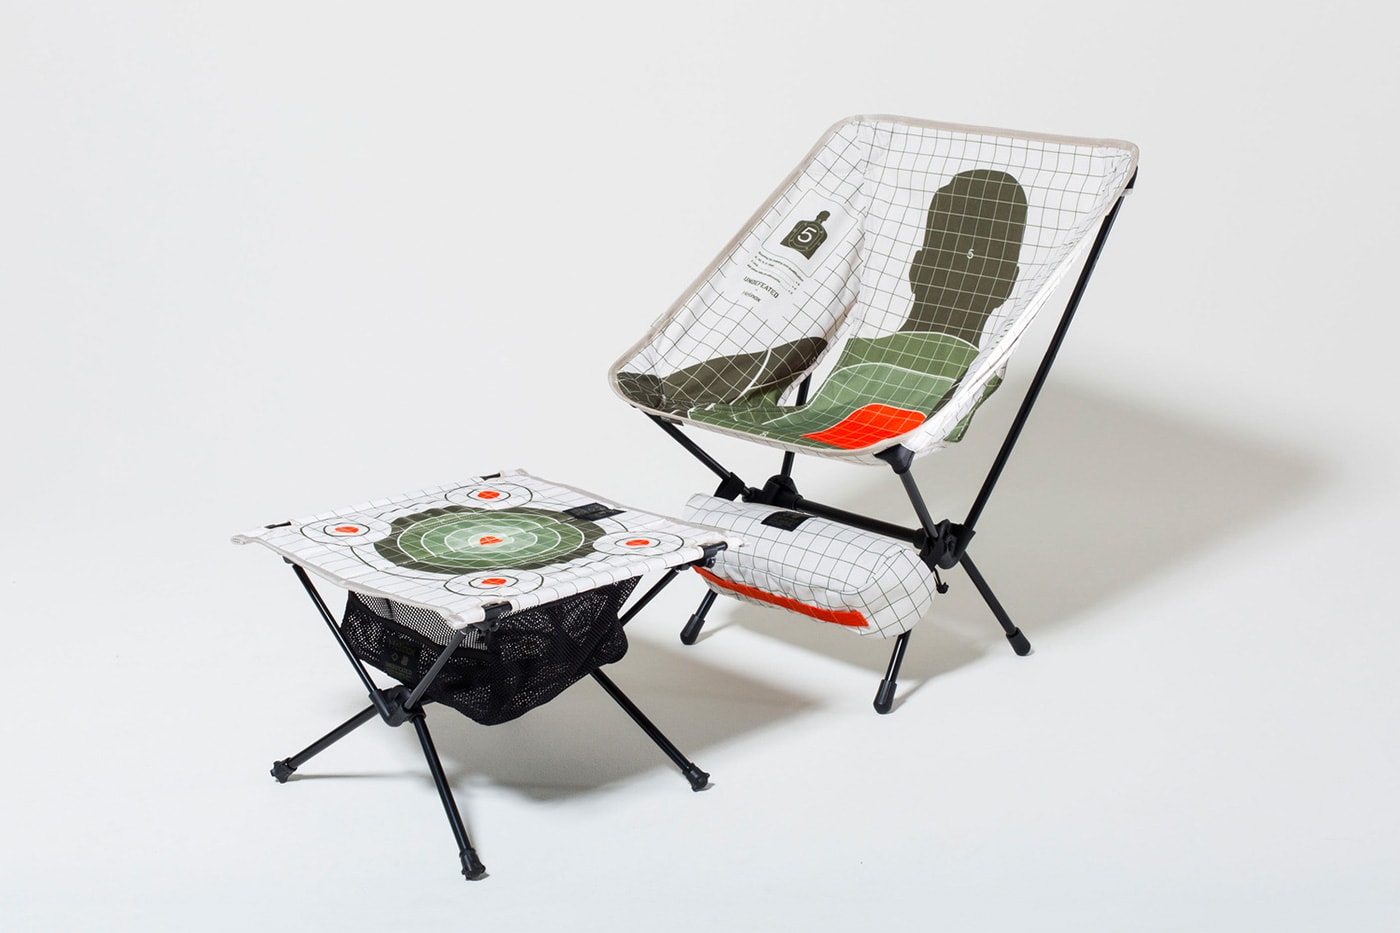 UNDEFEATED Helinox Tactical Chair and Table Camping Furniture Release